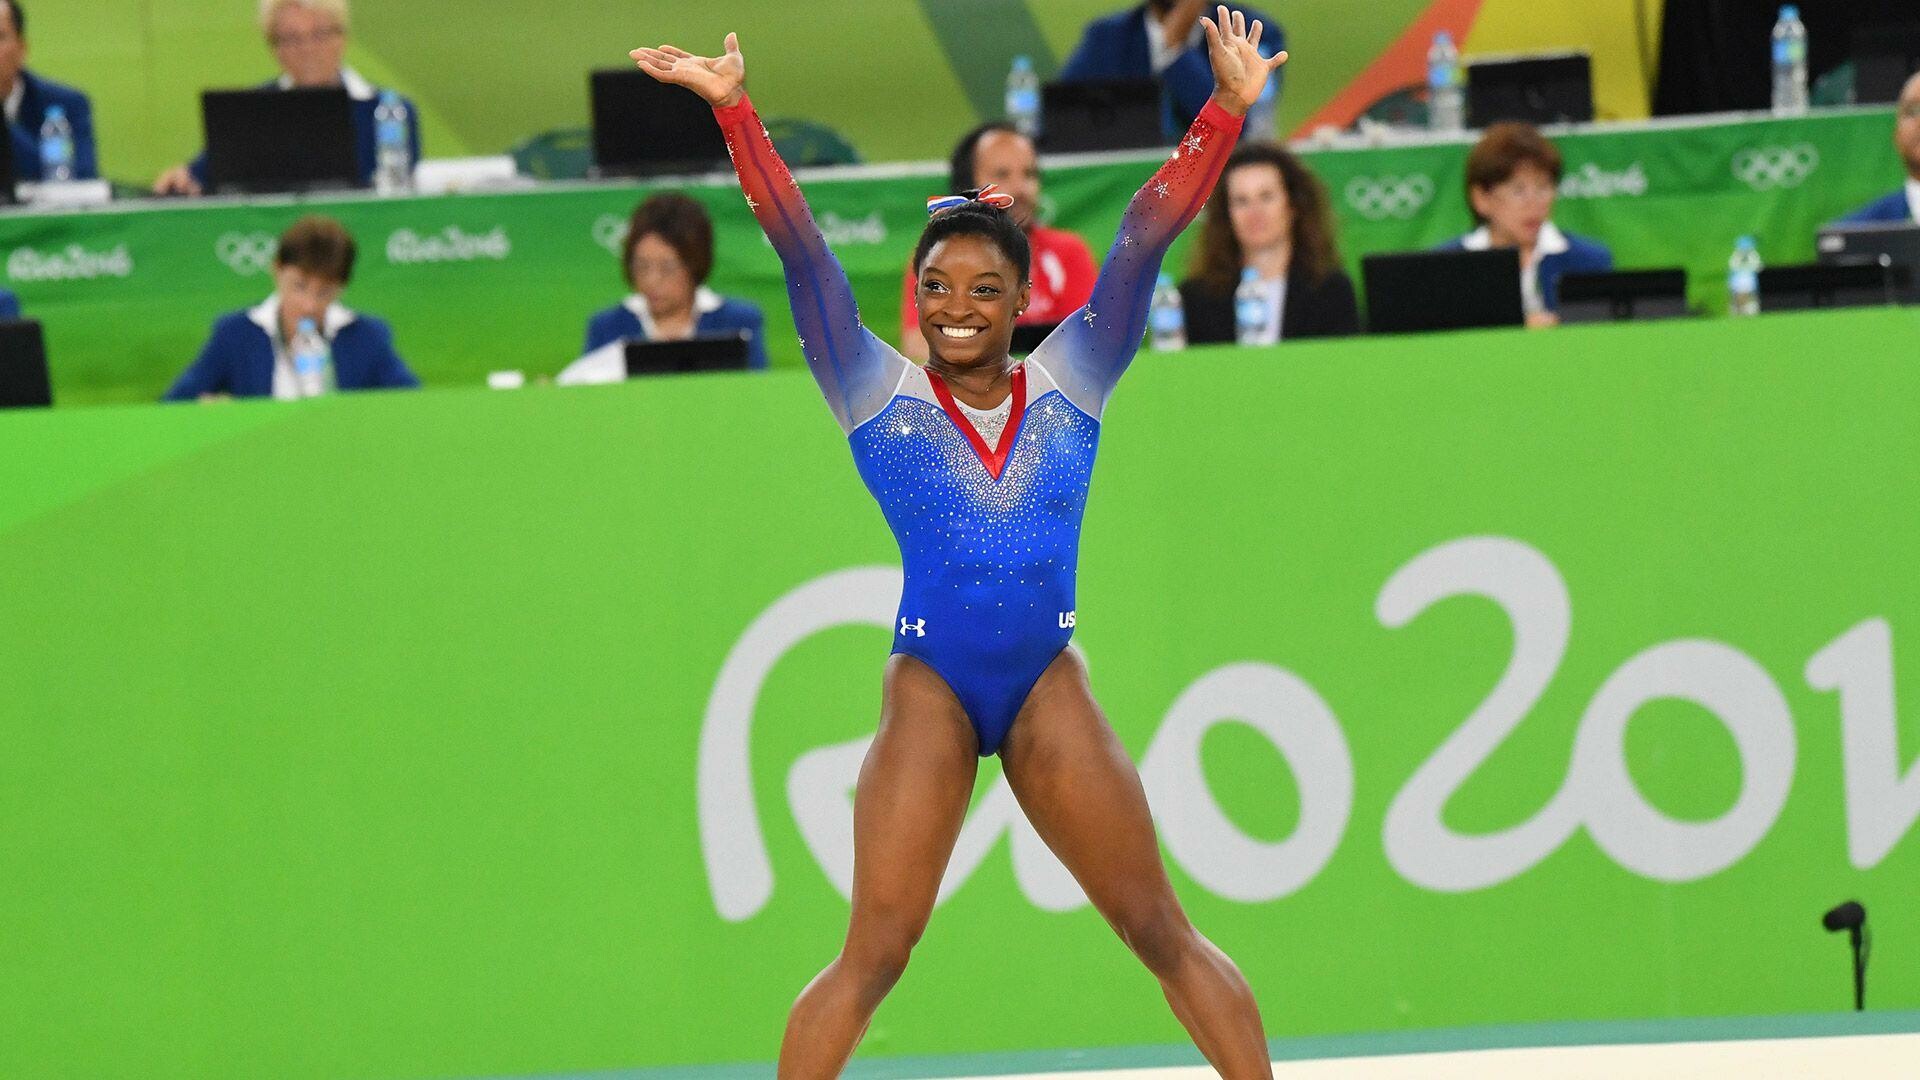 Simone Biles: Rio 2016, She won the all-around title at the 2018 National Championships. 1920x1080 Full HD Wallpaper.